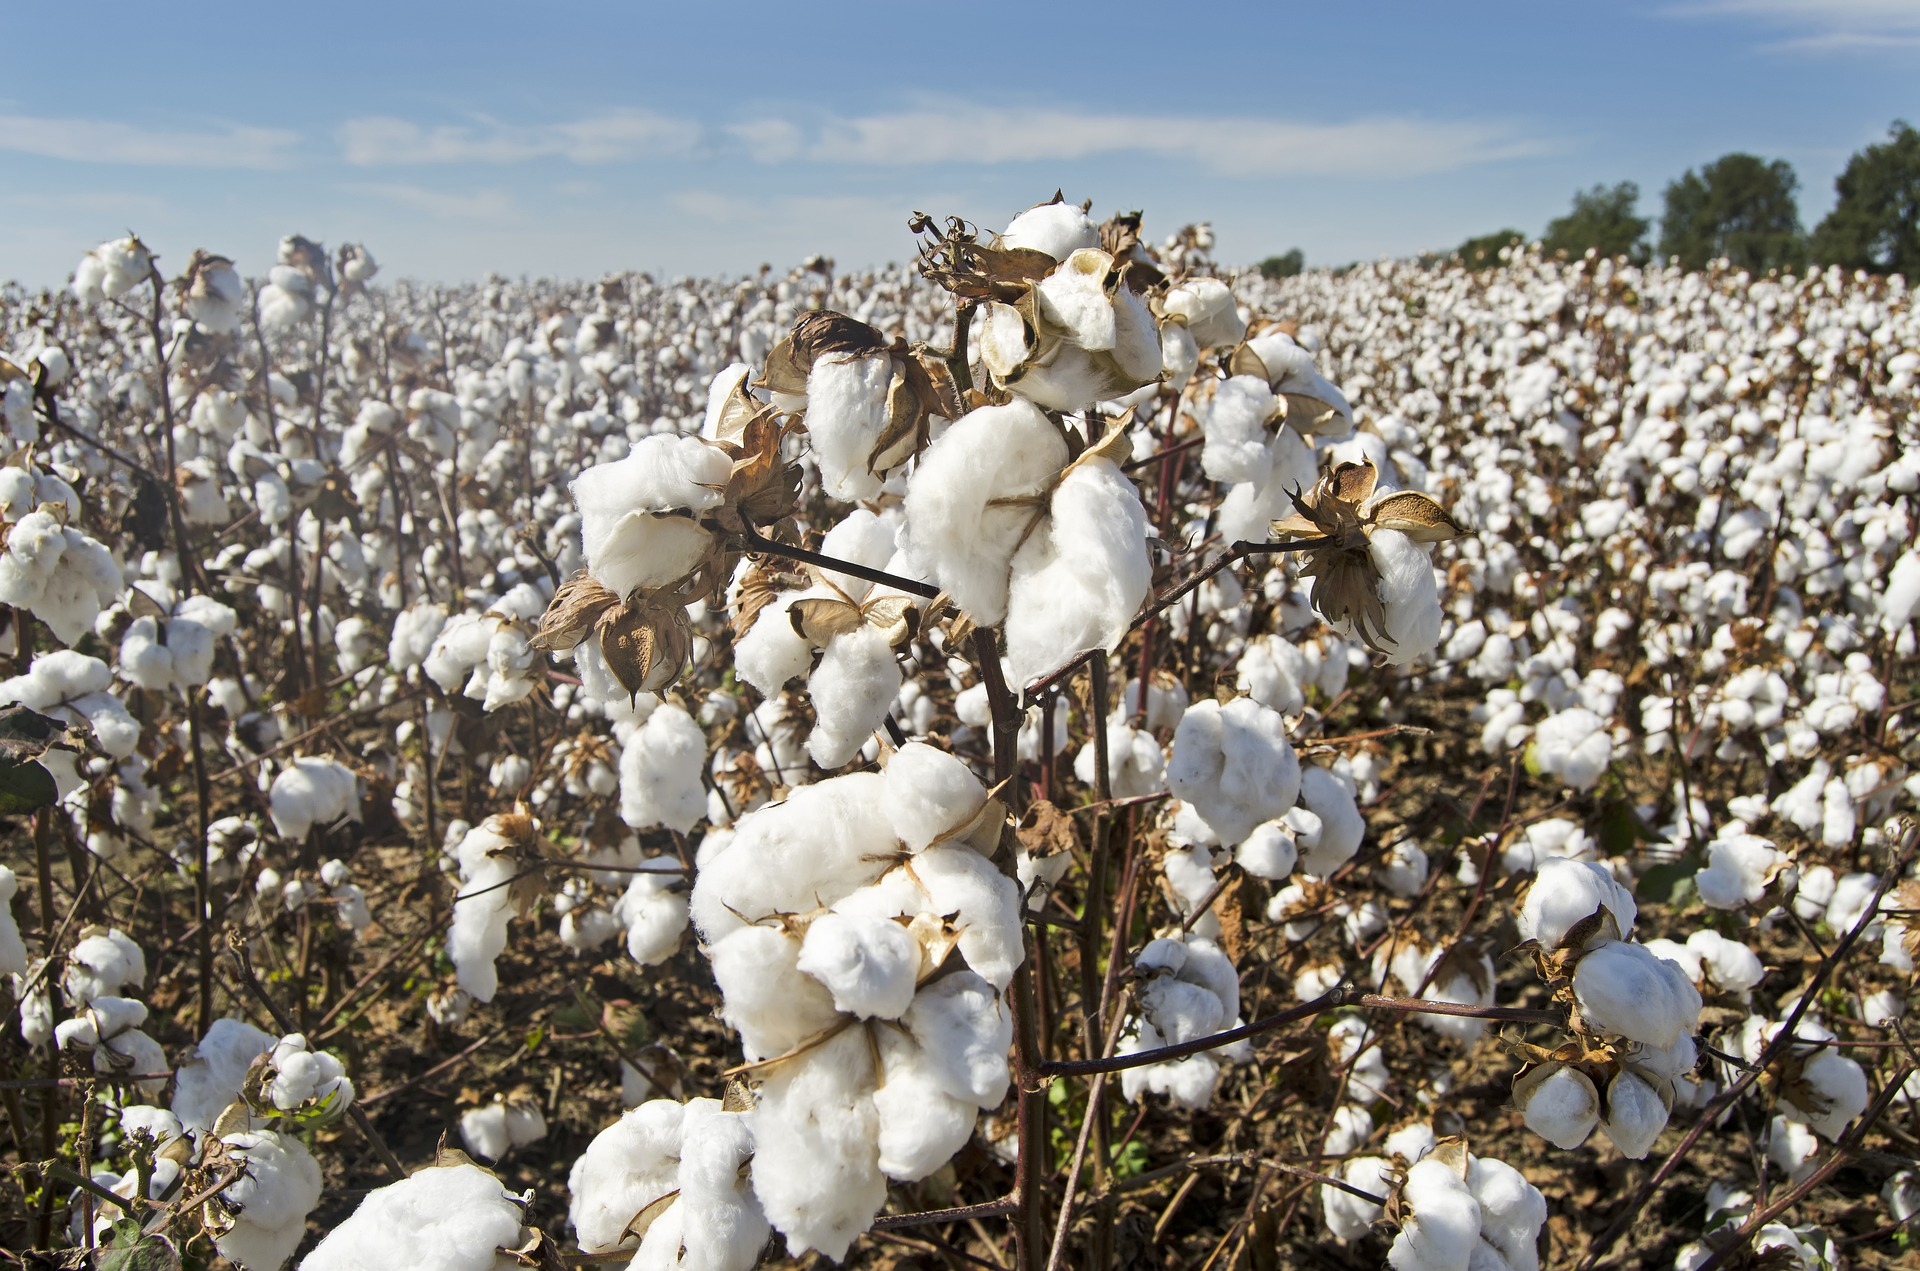 Fields of White Gold: The Beauty of Cotton Harvesting